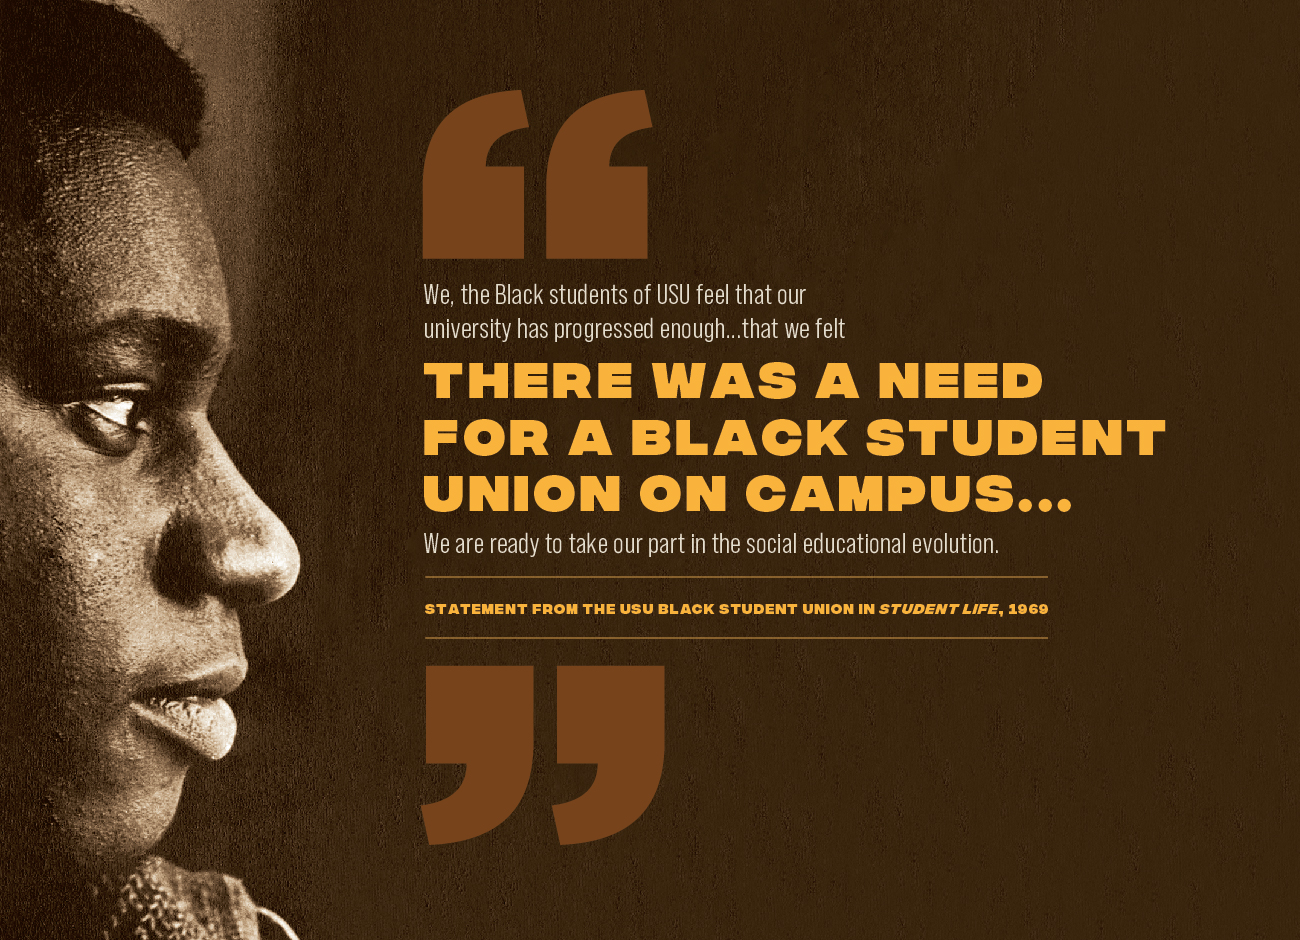 a profile of a young African American man facing a quote reading: We, the Black students of USU feel that our university has progressed enough ... that we felt there was a need for a black student union on campus ... We are reading to take part in the social education revolution." - statement from teh USU Black Student Union in Student Life, 1969